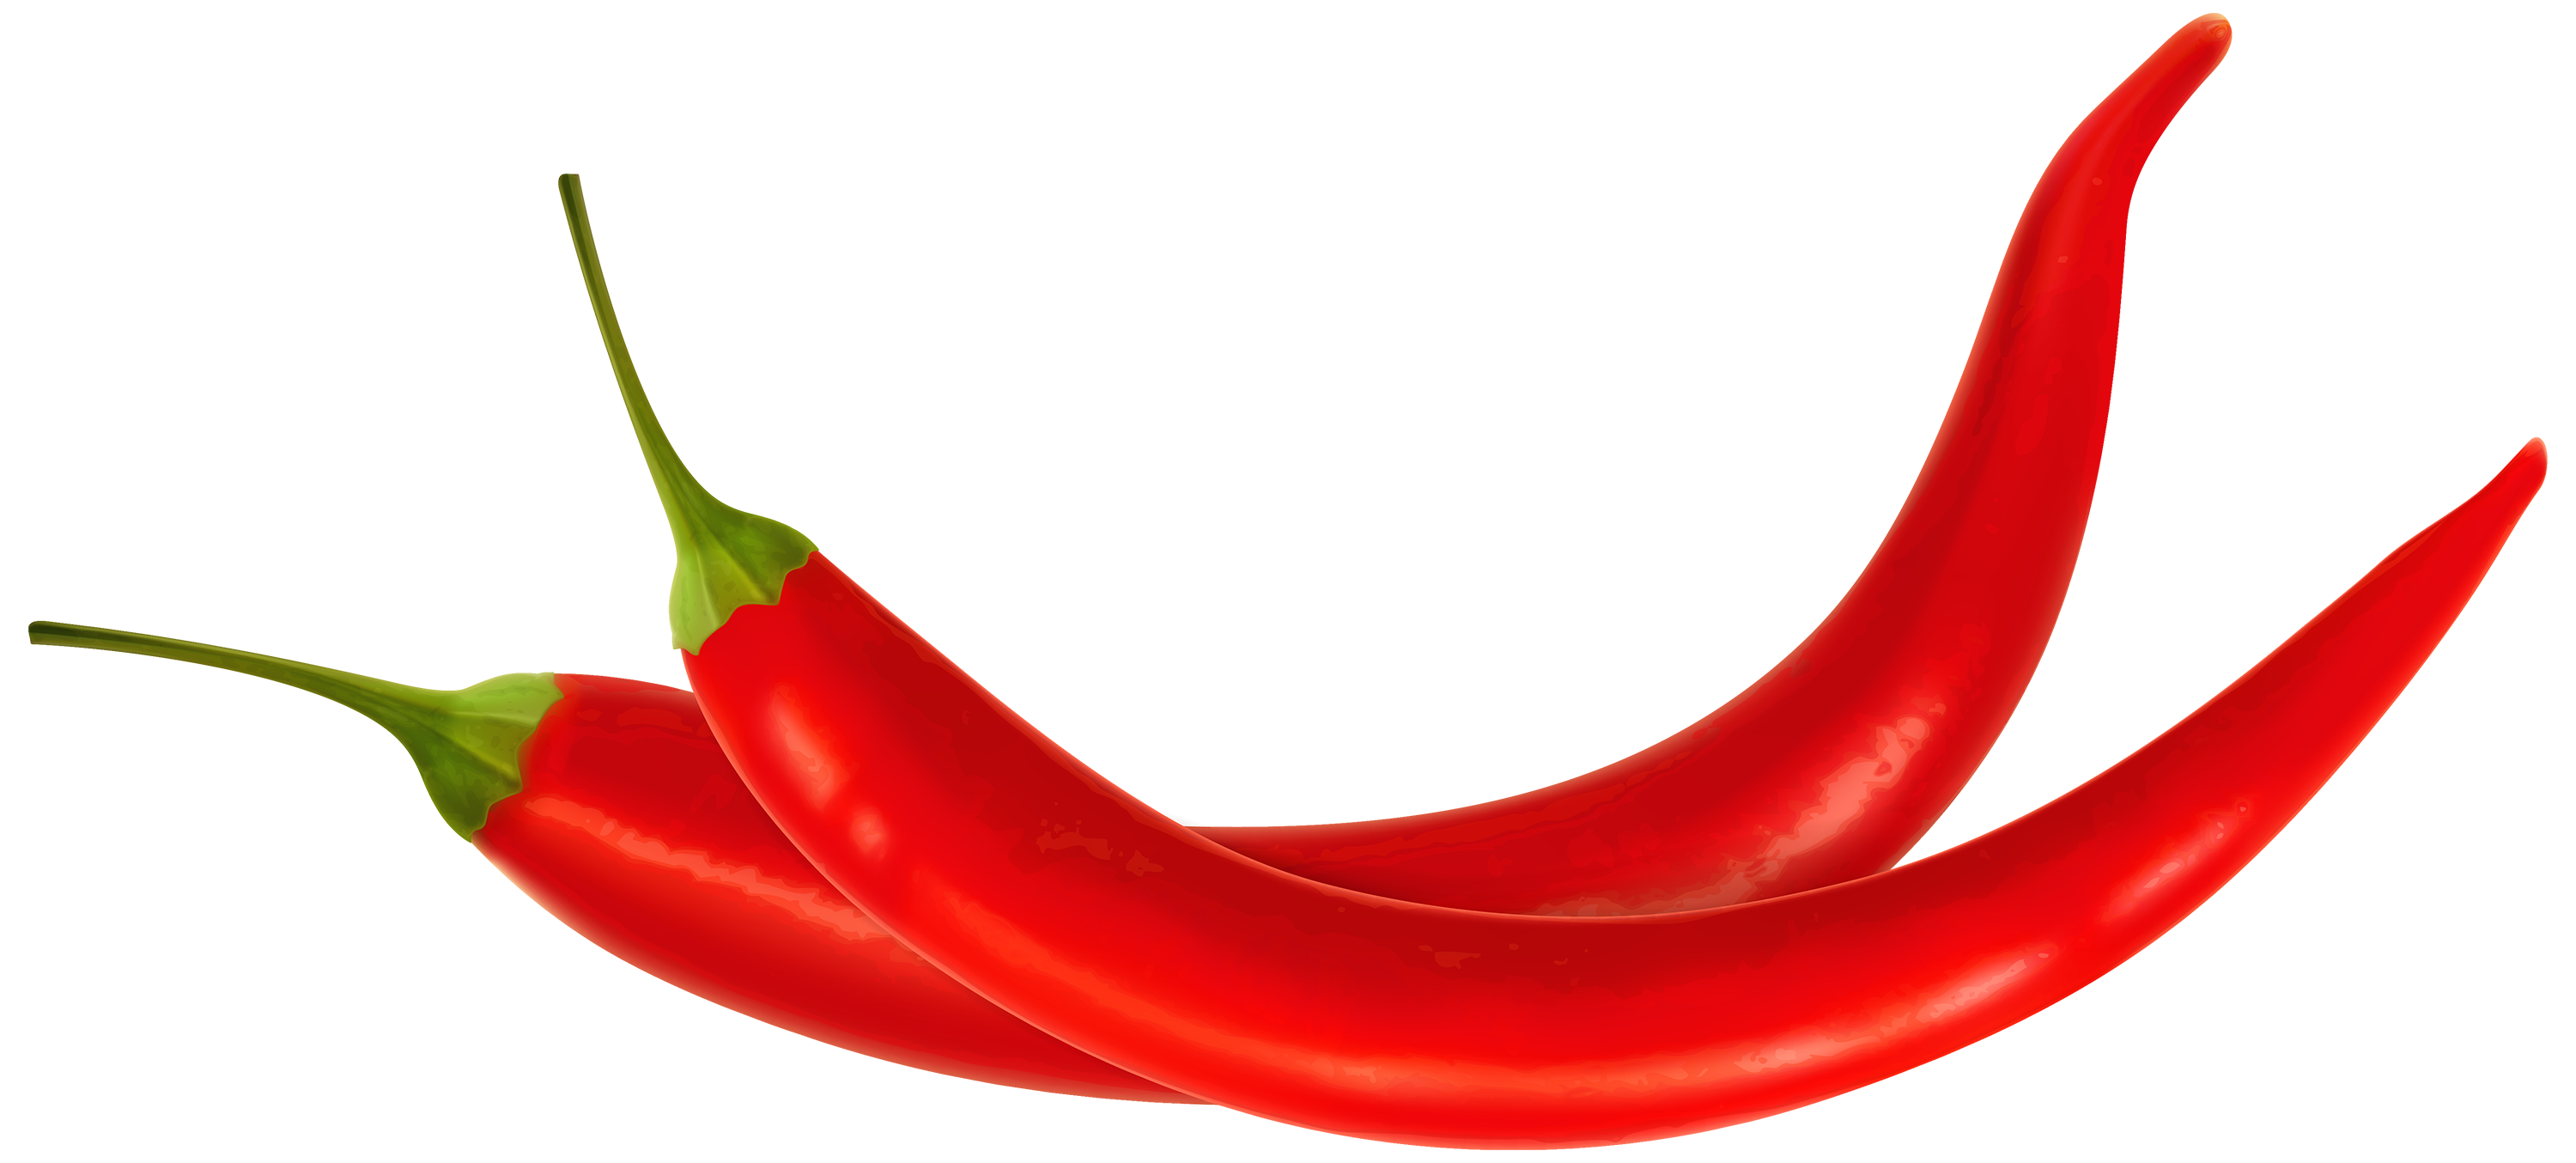 Chili clipart free images image